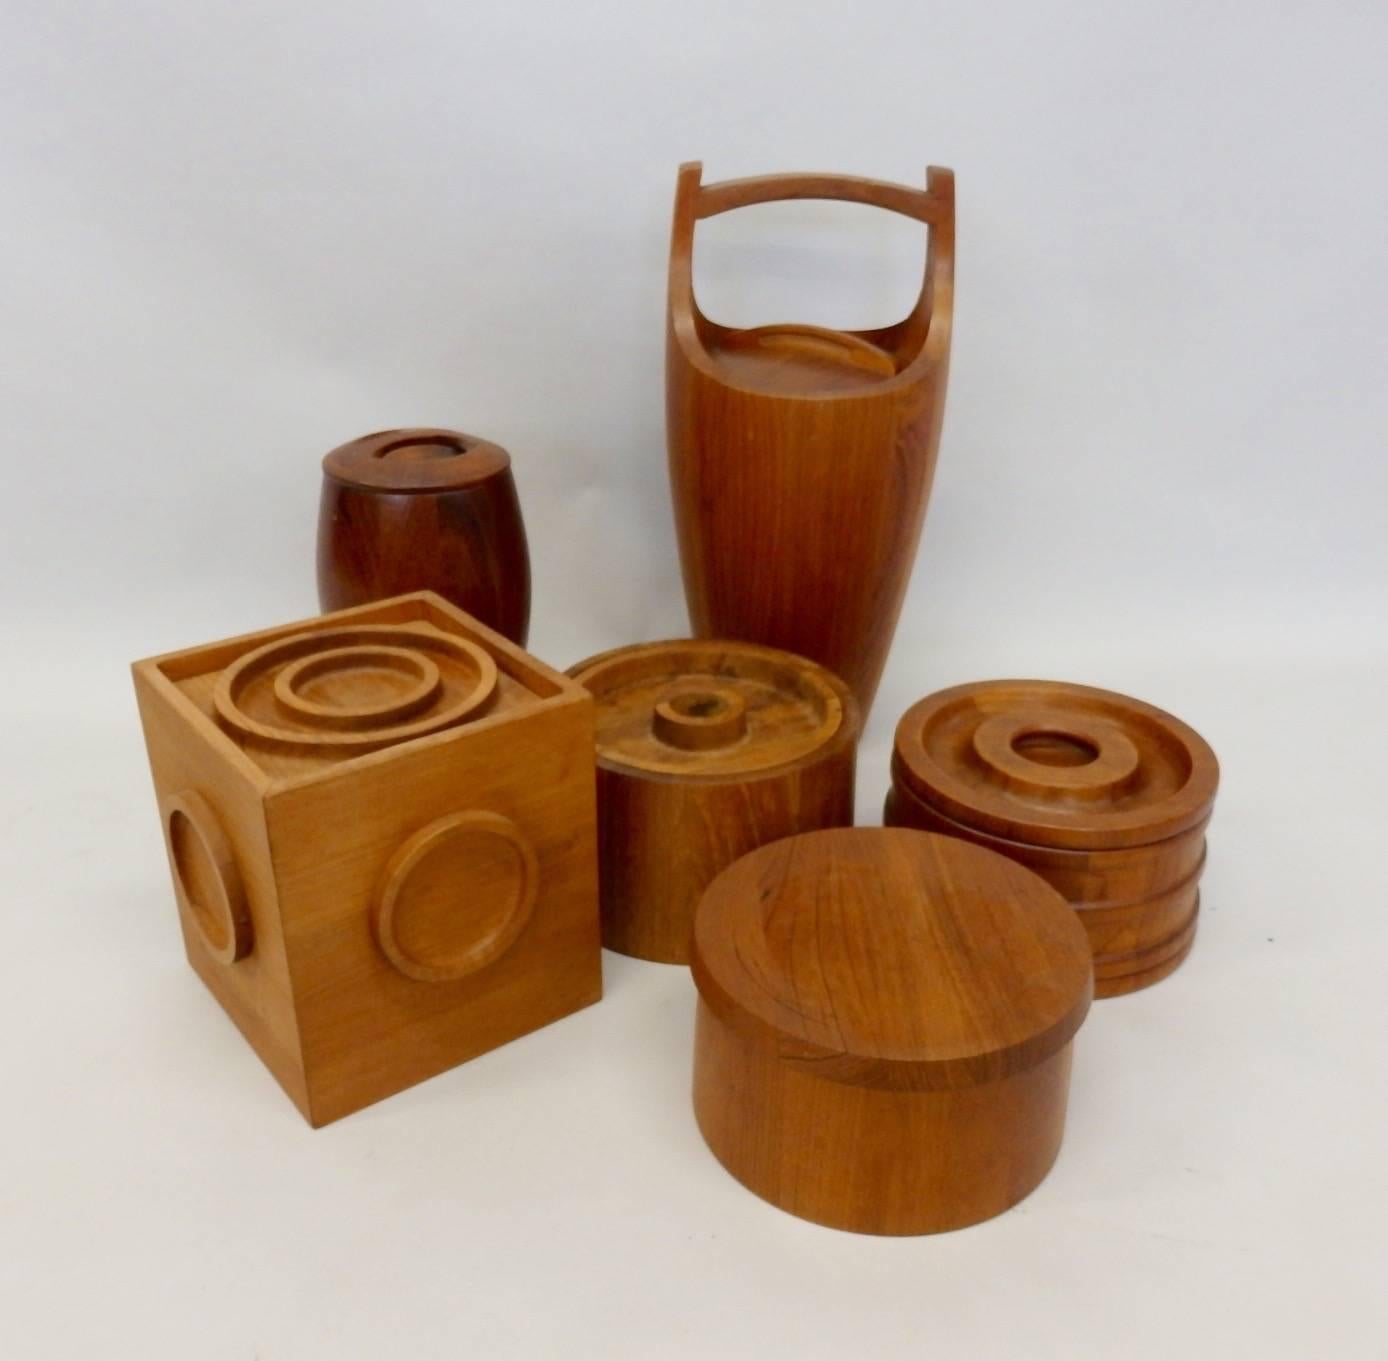 All five Danish teak ice buckets are Dansk designed by Jens Quistgaard. All five are made in Denmark. All five in very good condition age shows as patina.